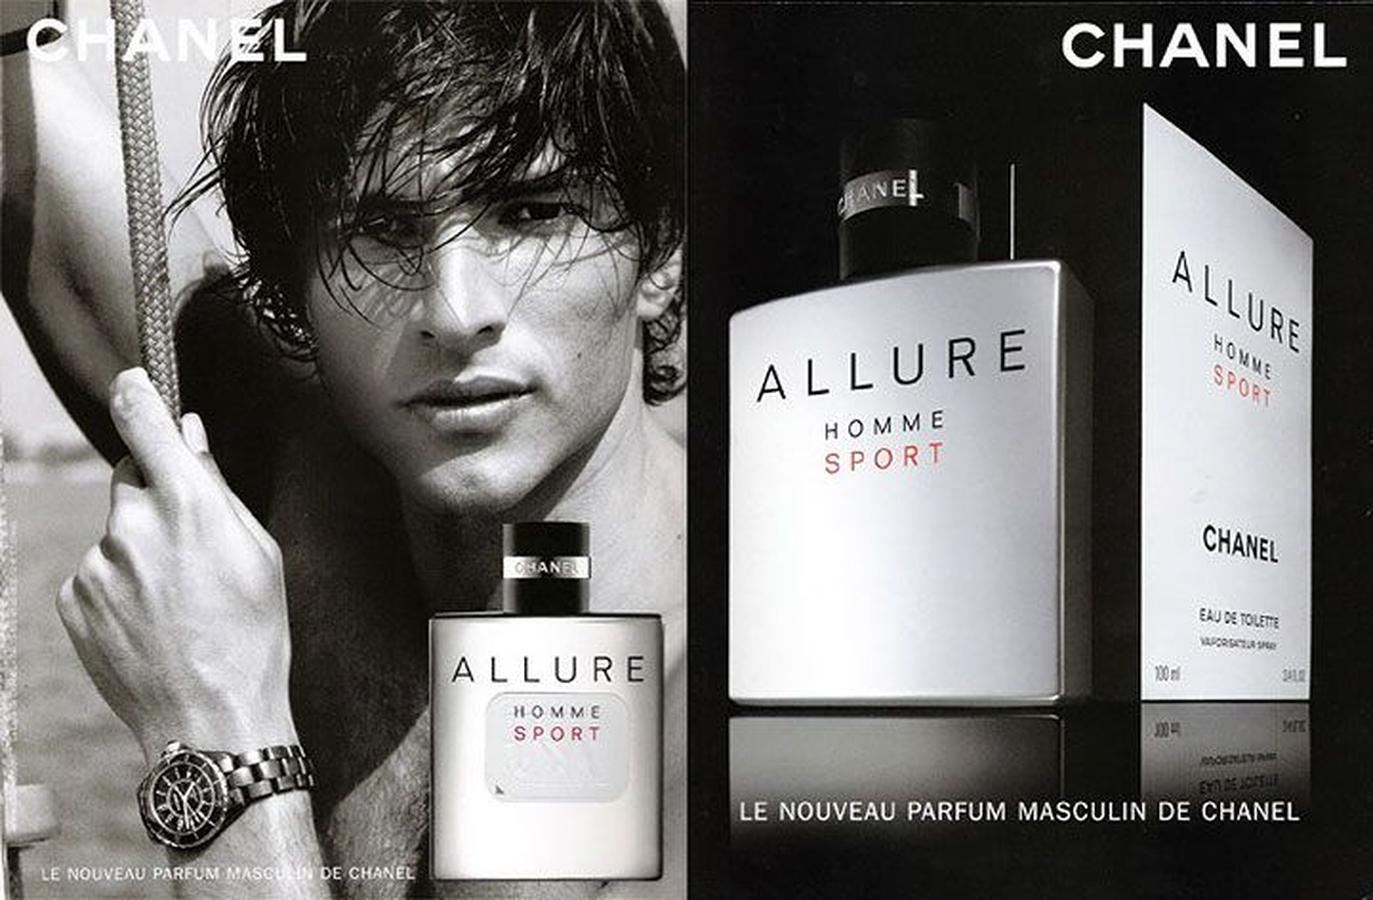 Духи allure sport. Chanel Allure homme Sport 100ml EDT men. Chanel Allure homme Sport. Chanel Allure Sport men 100ml. Chanel Allure homme Sport 100ml.